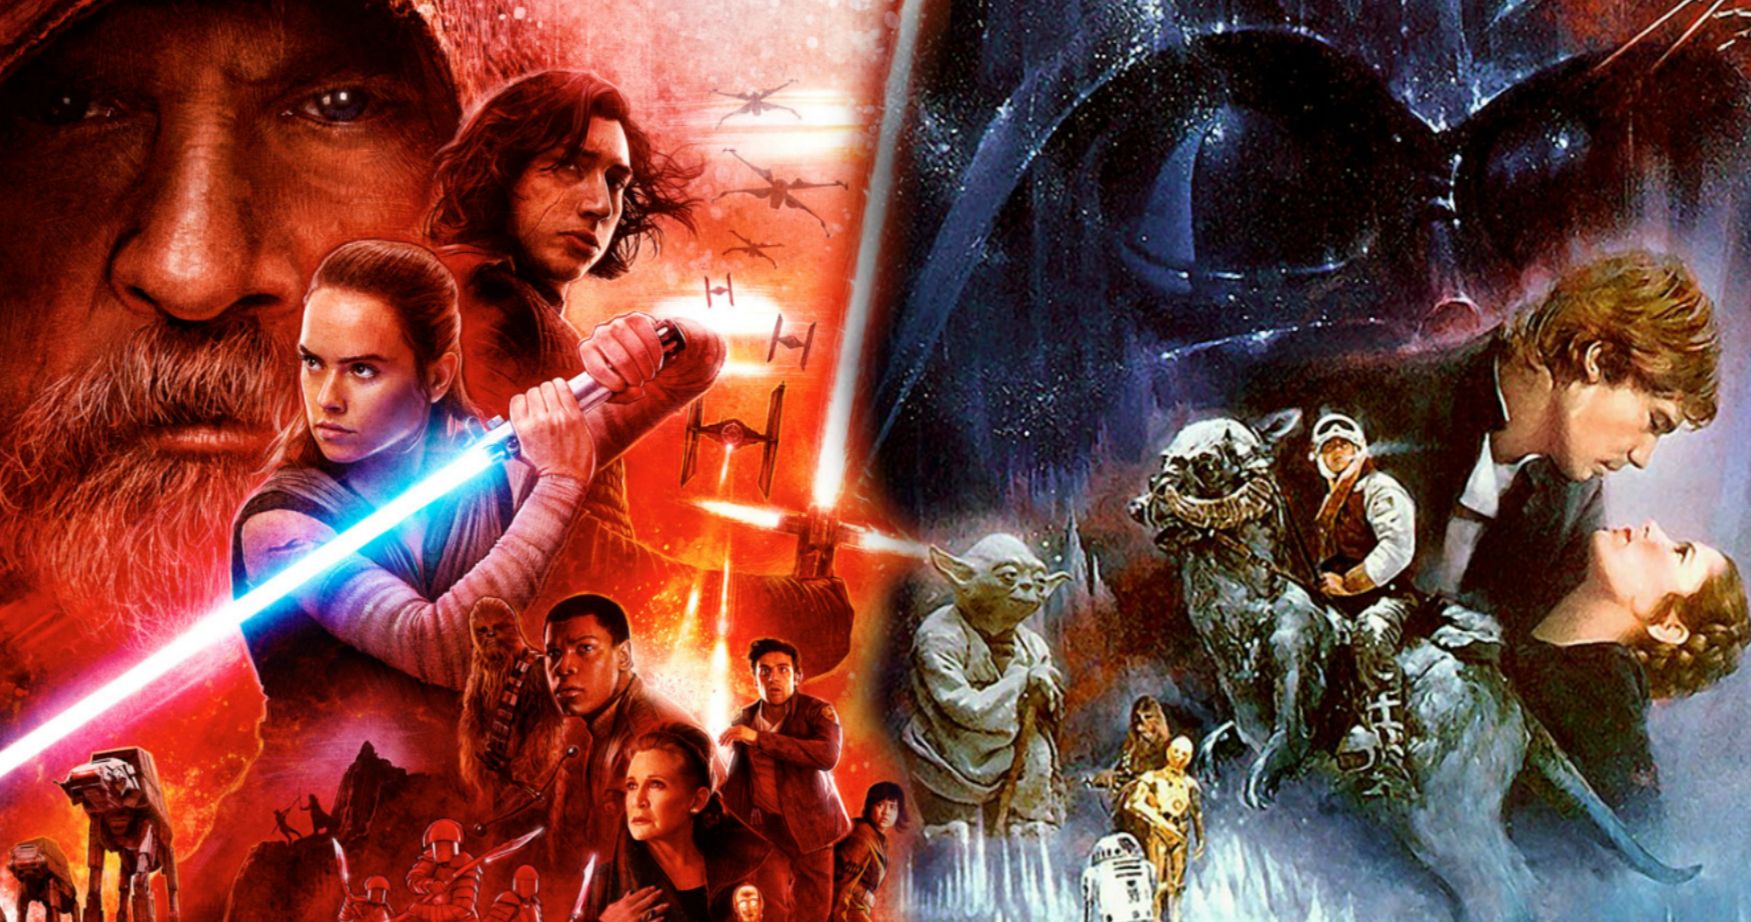 Last Jedi Director Admits Empire Strikes Back Disappointed Him as a Kid